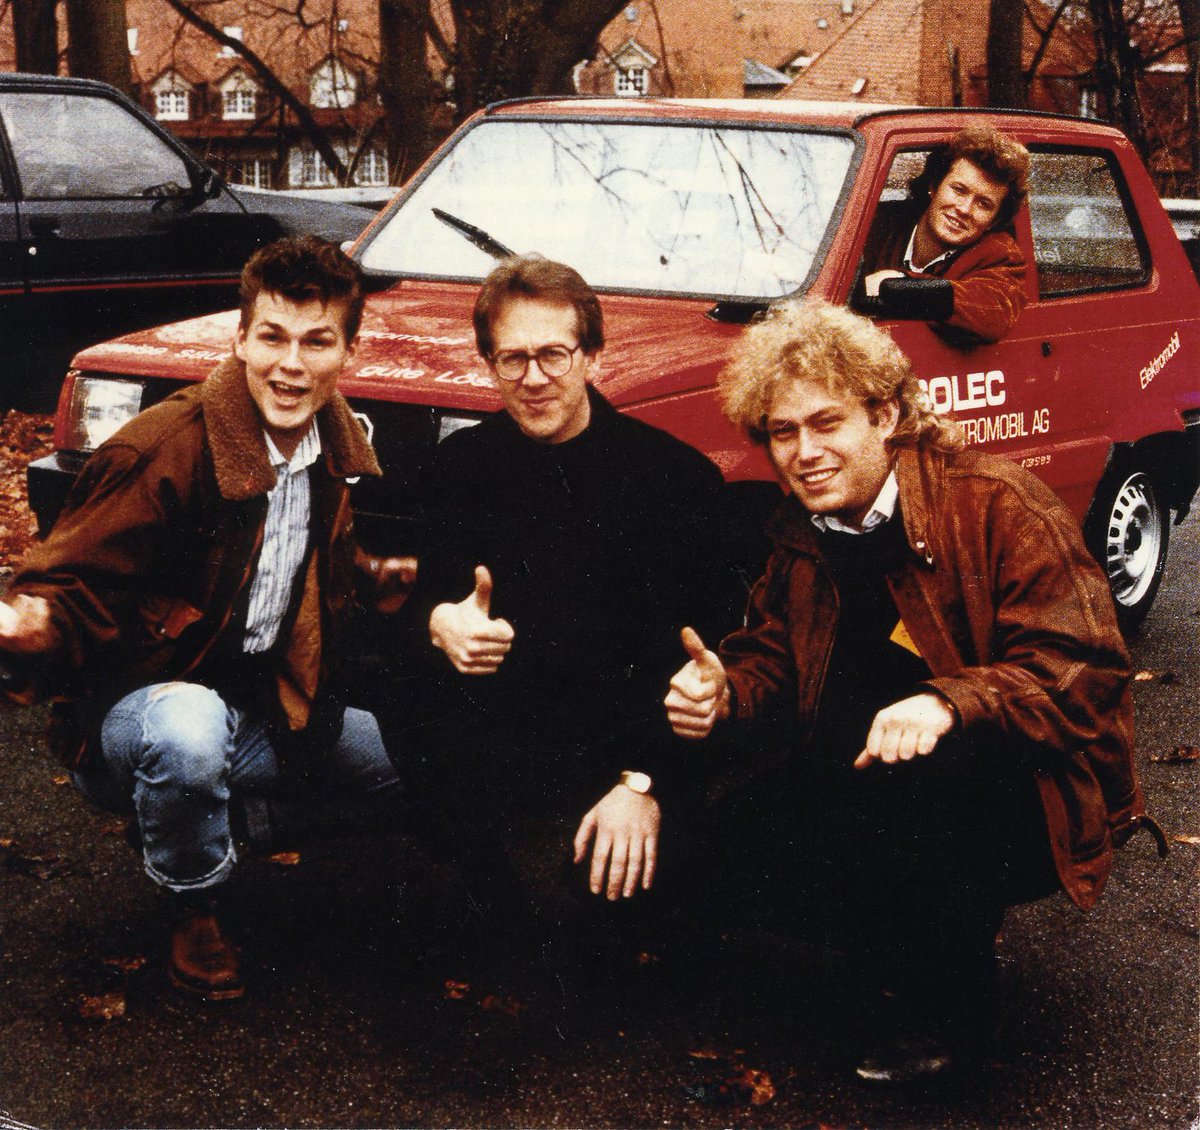 (3/8) While in Switzerland in 1989, Harket and keyboardist Magne Furuholmen bought a Fiat Panda that had been converted by its owner to run on a battery. : Bellona